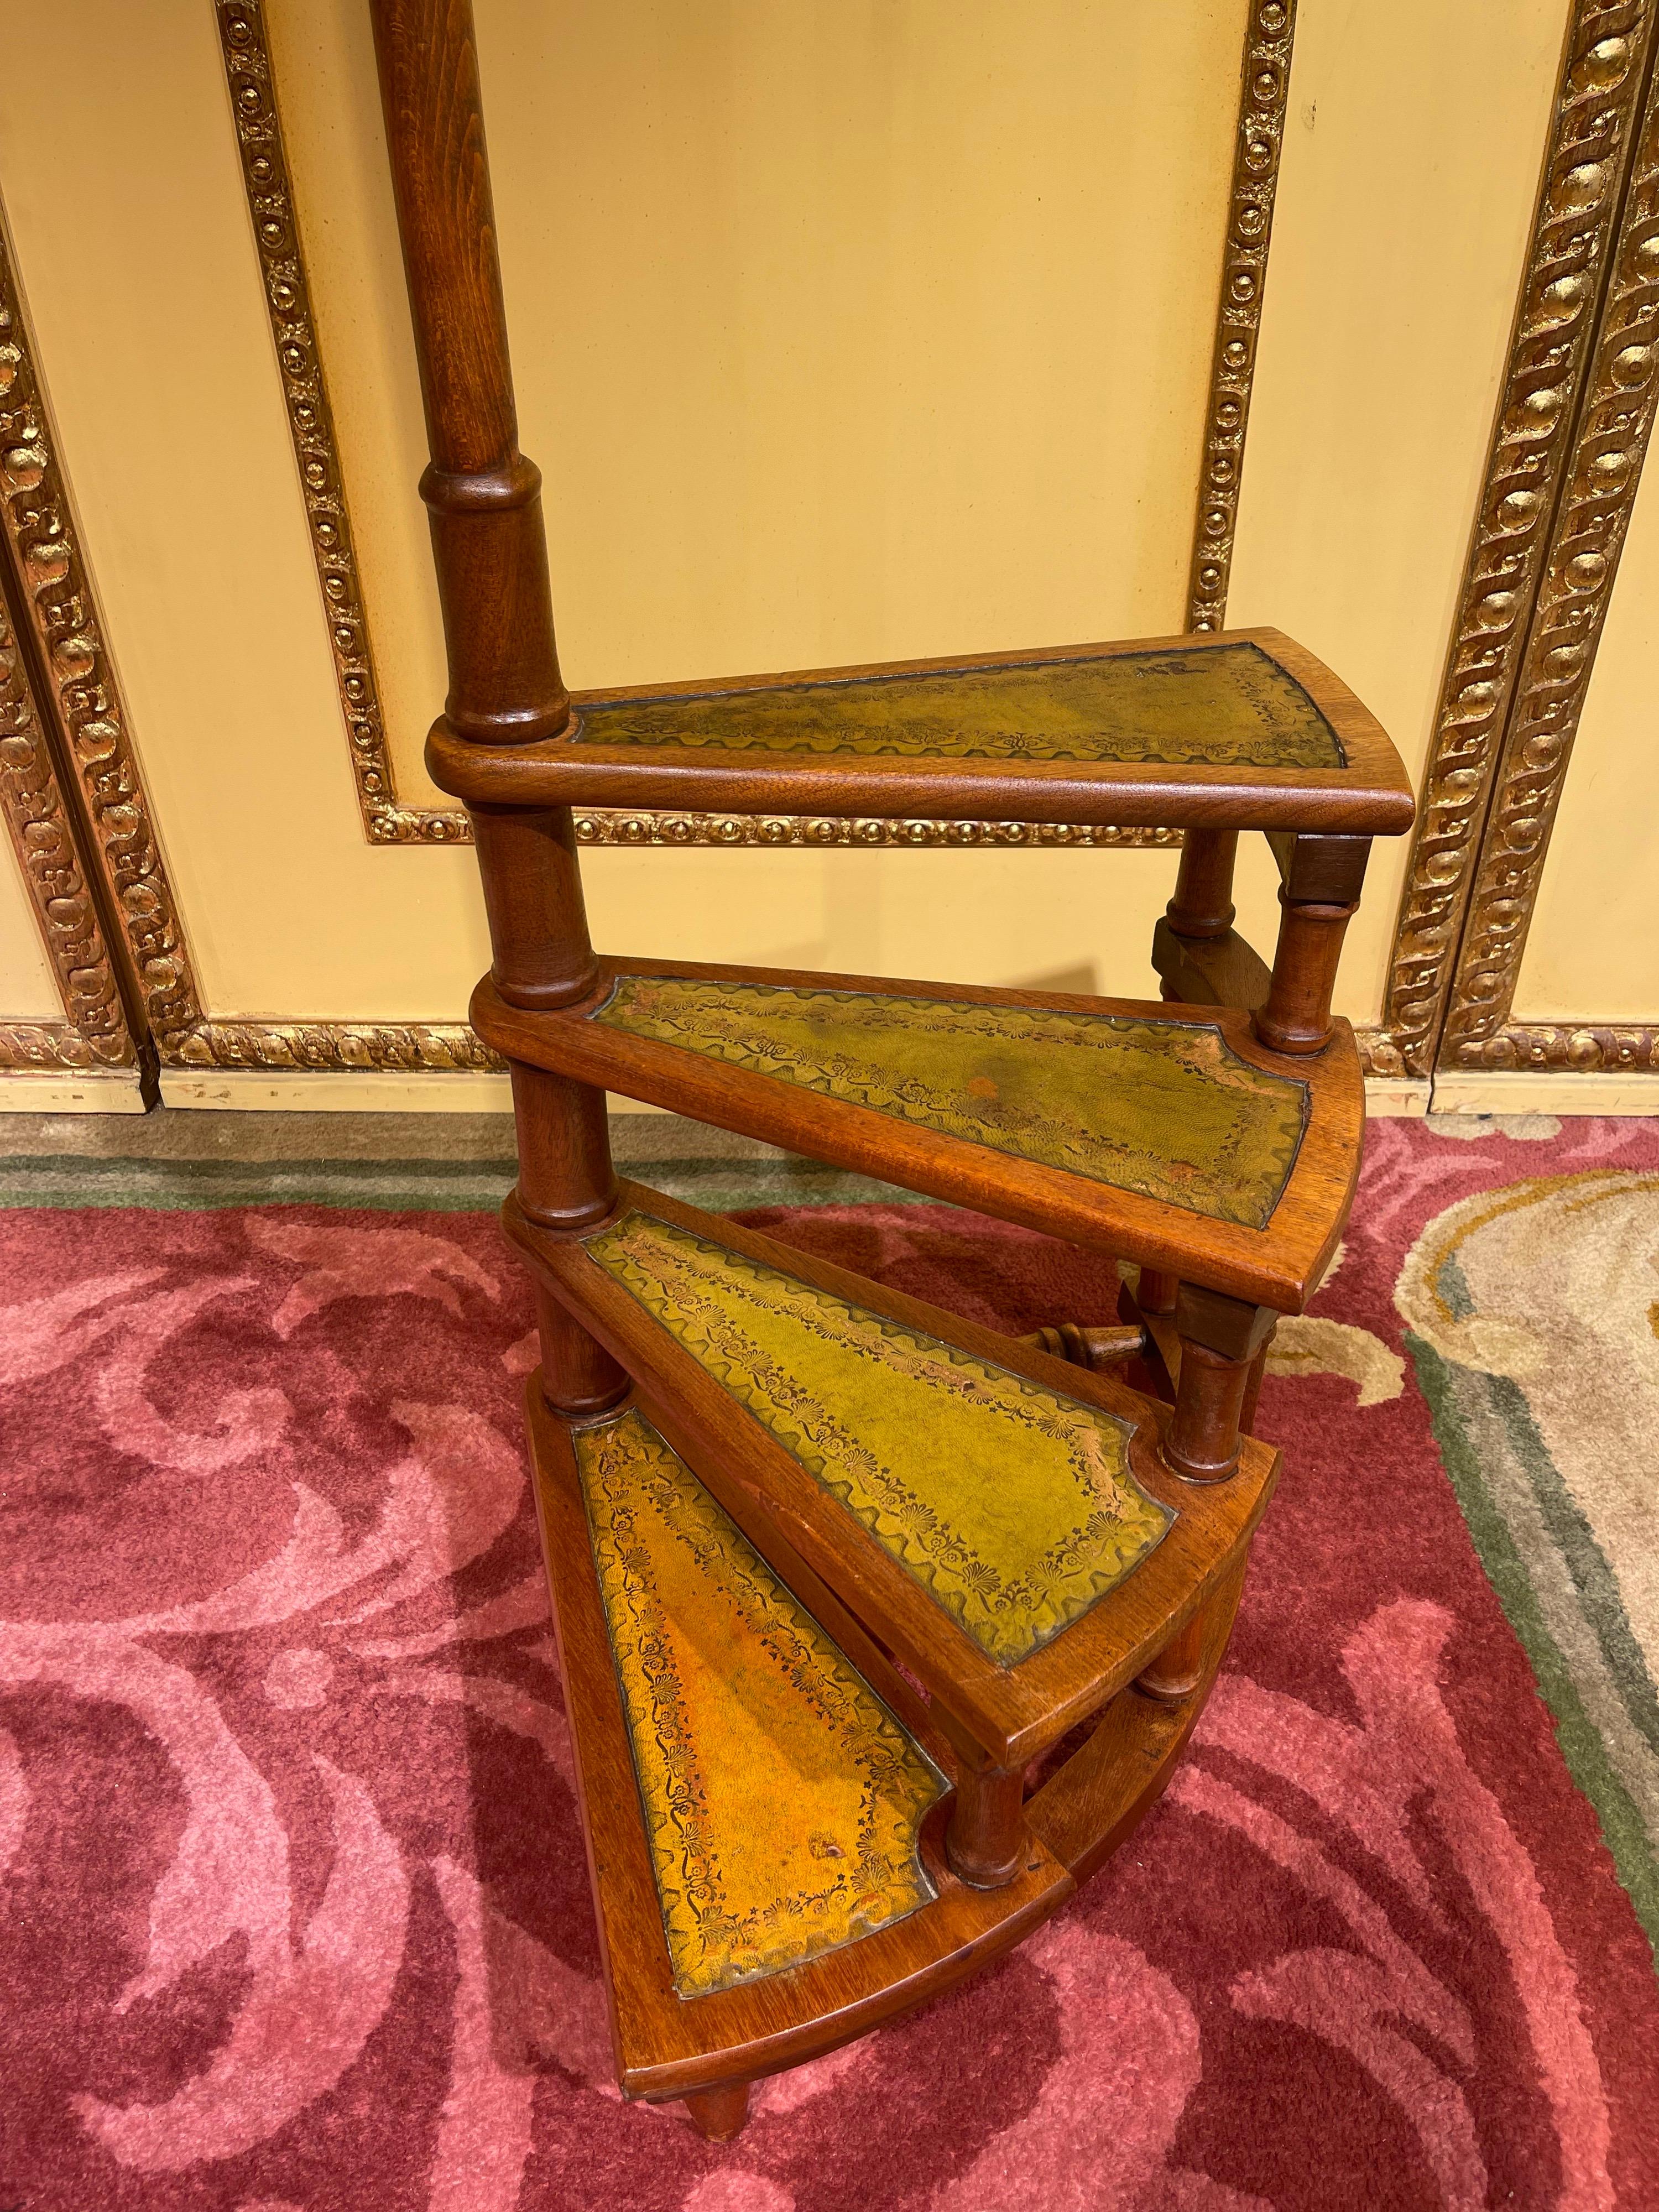 20th century English leather library step or stairs / stepladder, Victorian

Solid wood mahogany stained. English library manager / stepladder 20th century, Victorian. Four step with classic leather plate and gold embossing. Library stairs,